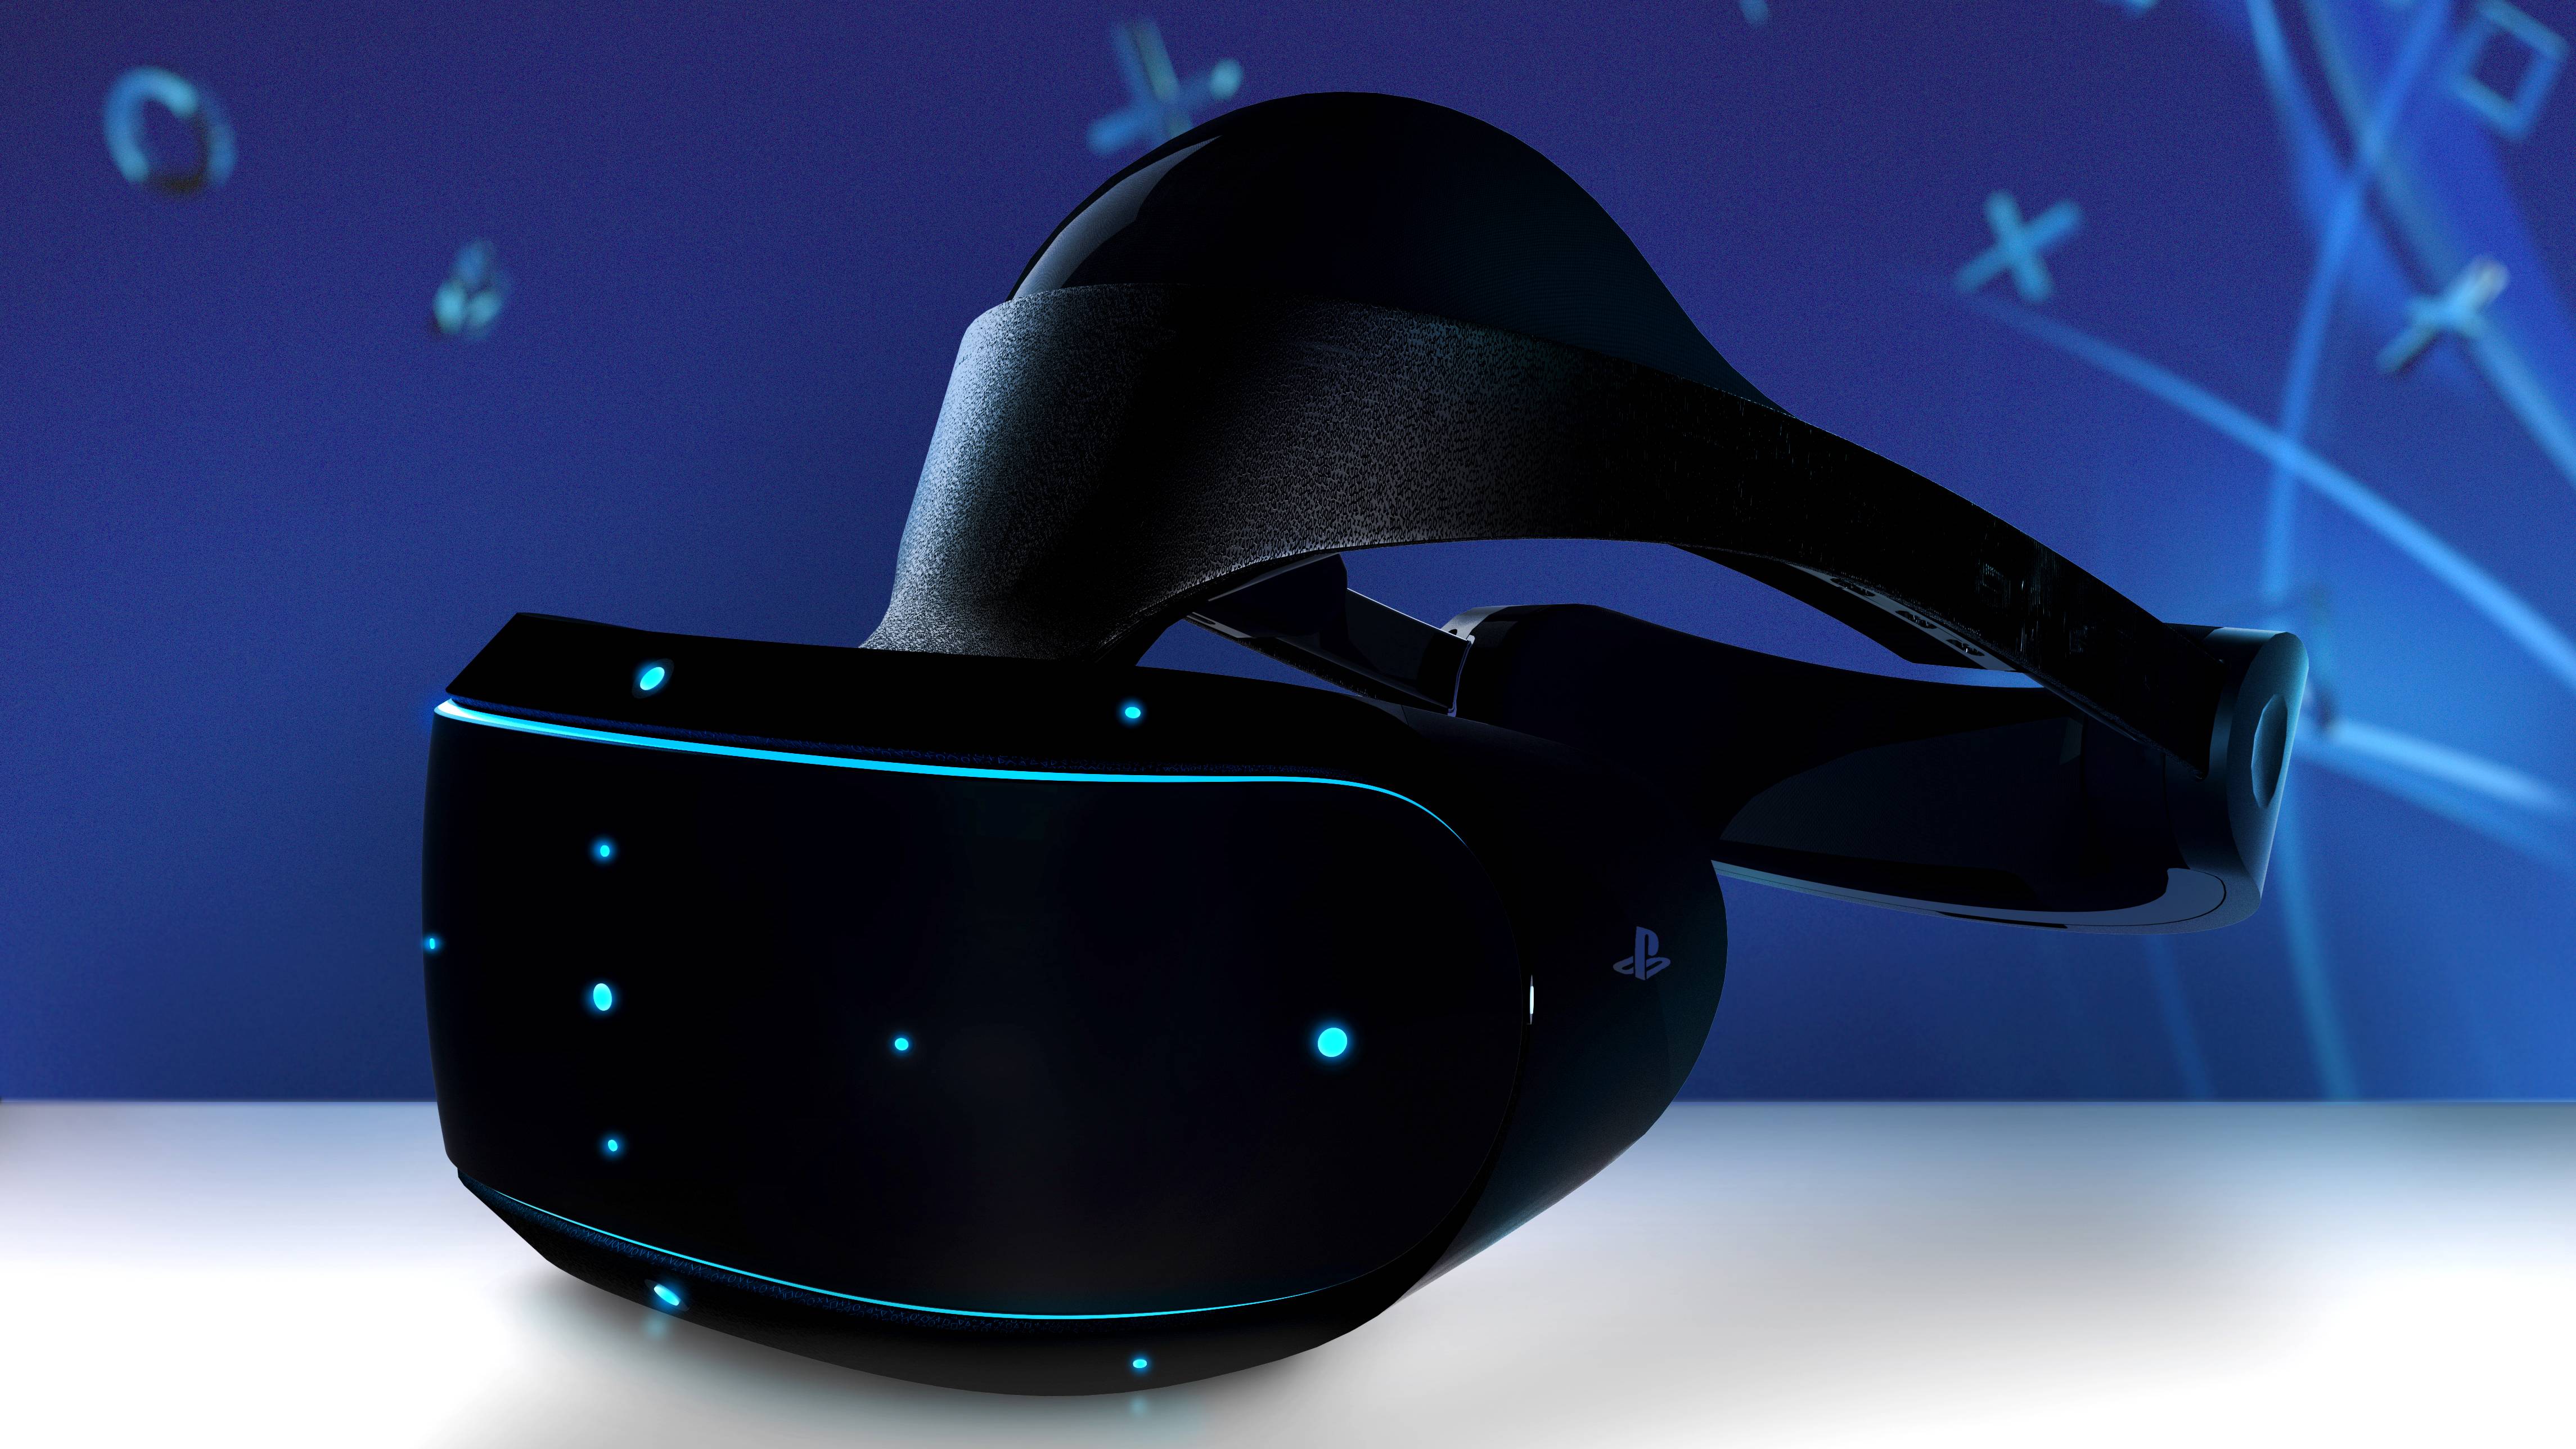 These 7 PS VR2 games have me excited about what Sony's new VR